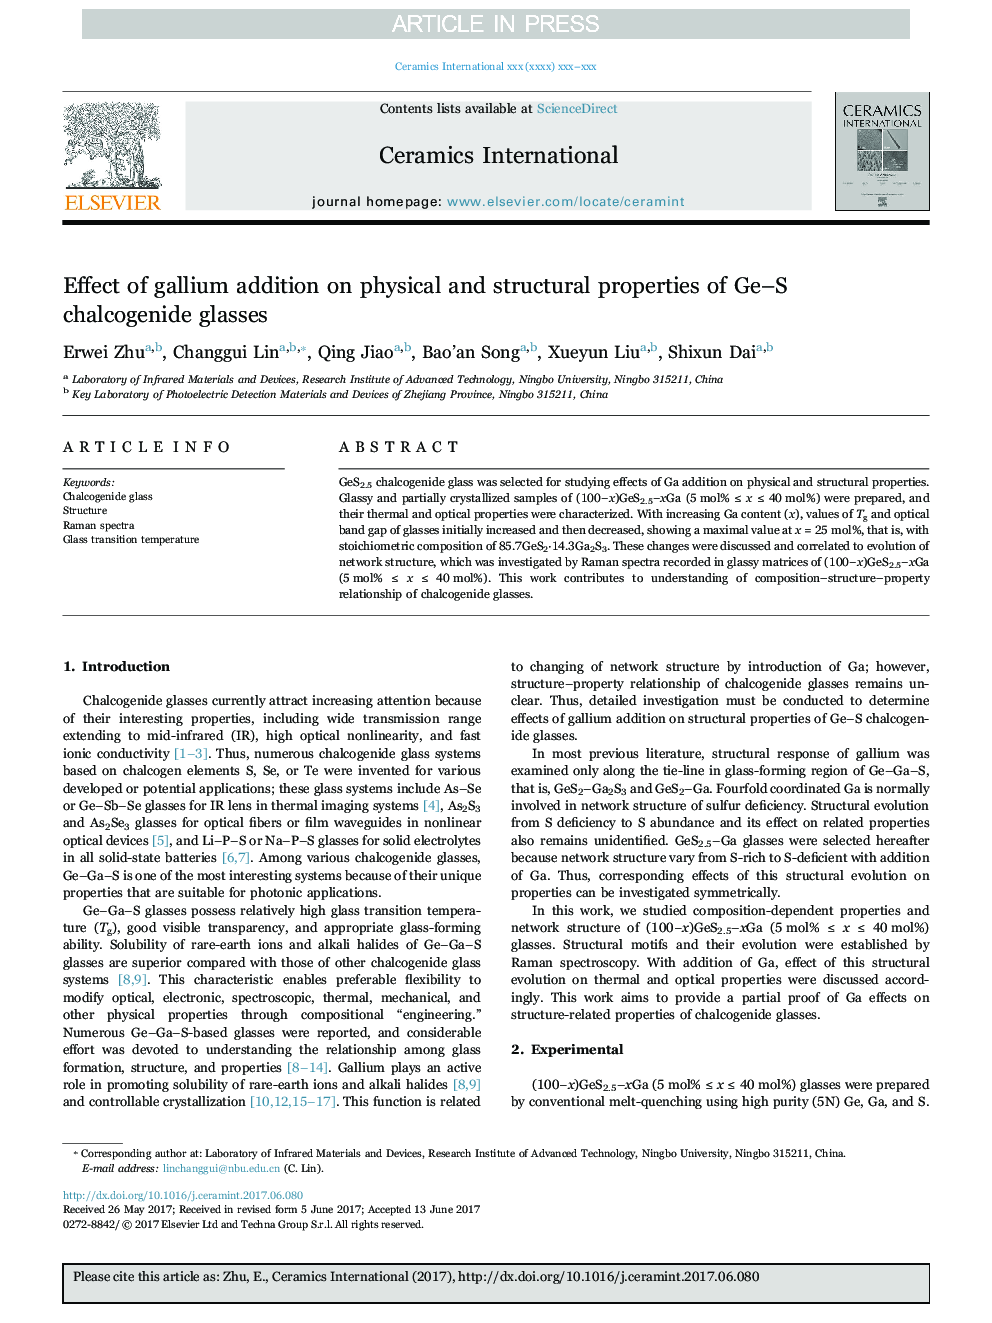 Effect of gallium addition on physical and structural properties of Ge-S chalcogenide glasses